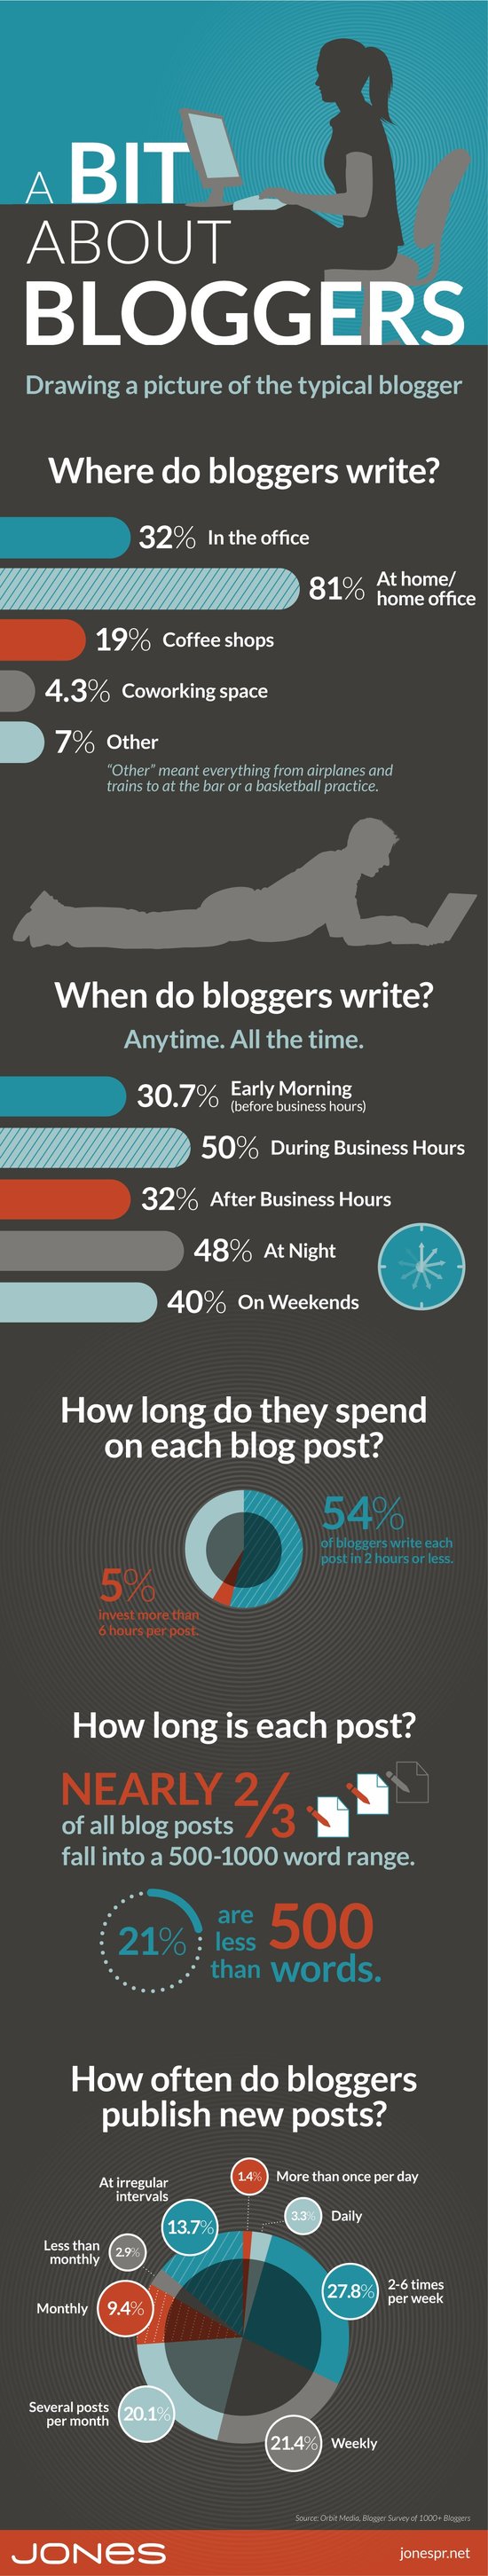 A Bit About Business Bloggers (infographic)